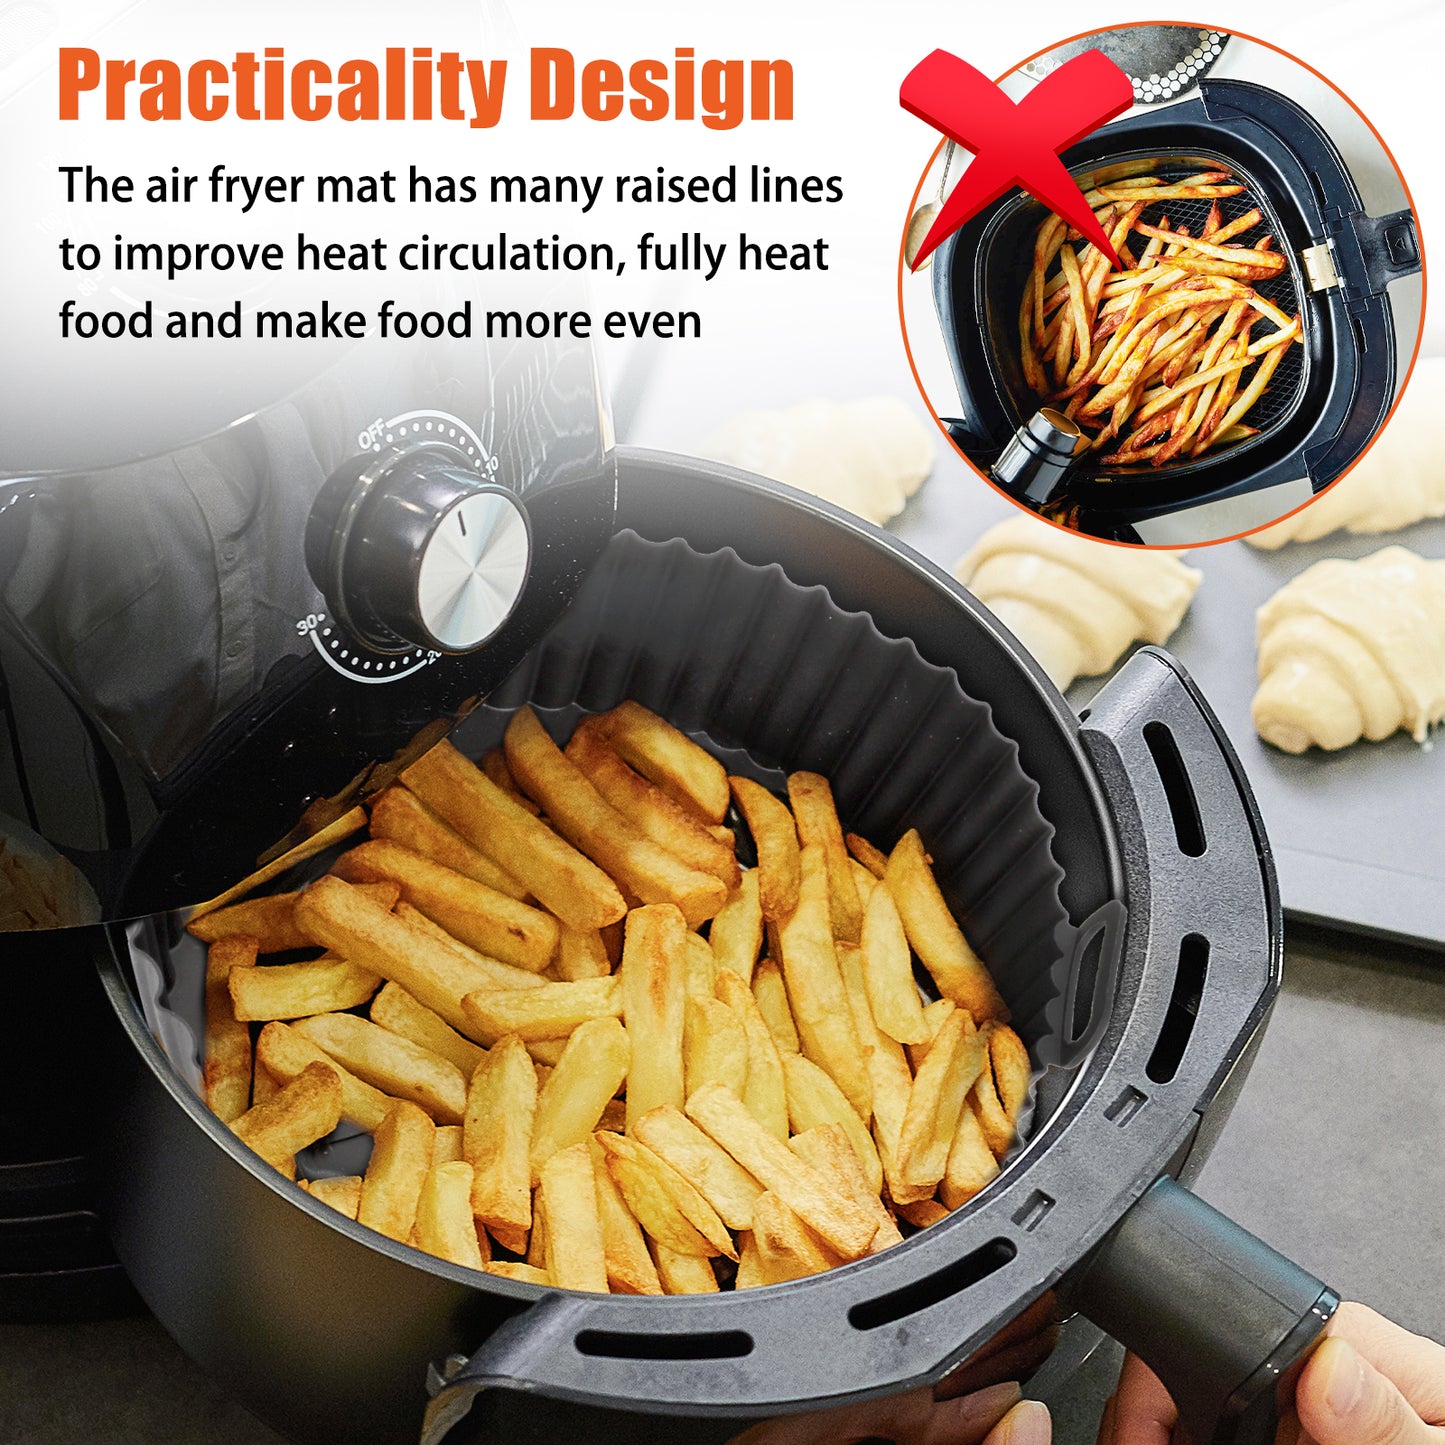 2Pcs Silicone Air Fryer Liners Pot - Reusable Non-Stick Air Fryer Silicone Basket Bowl,food-grade Silicone Baking Tray Pots for 5.3QT Air Fryer,Oven Accessories (Black)